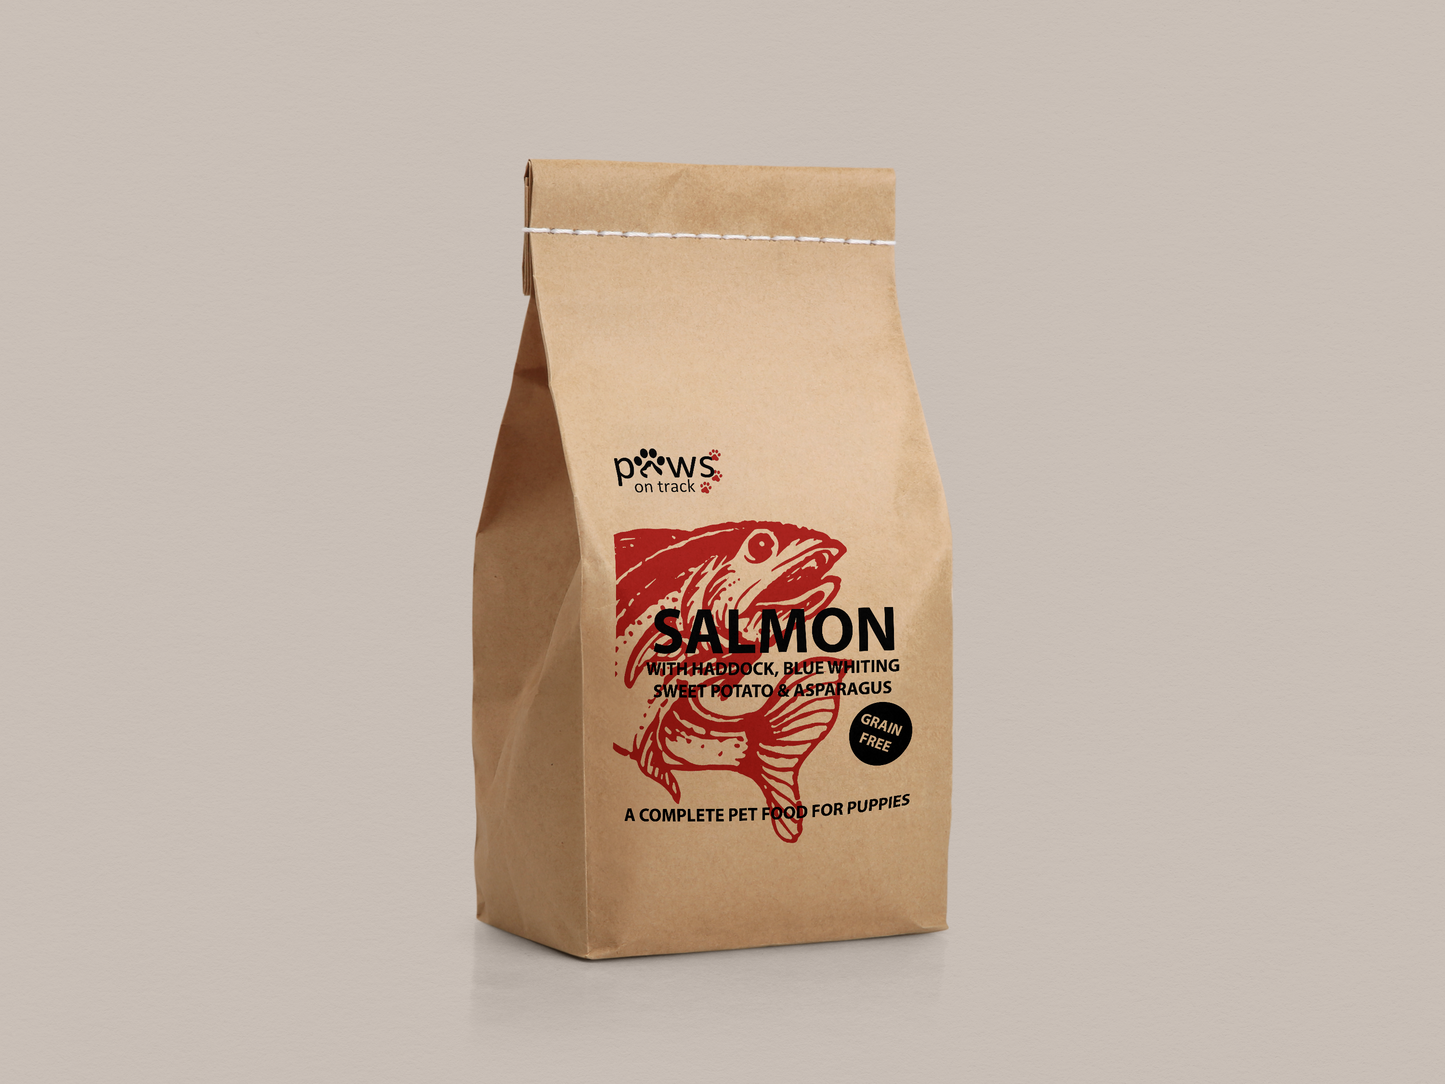 Salmon Dry Food (Puppy) - 6KG by Paws on Track